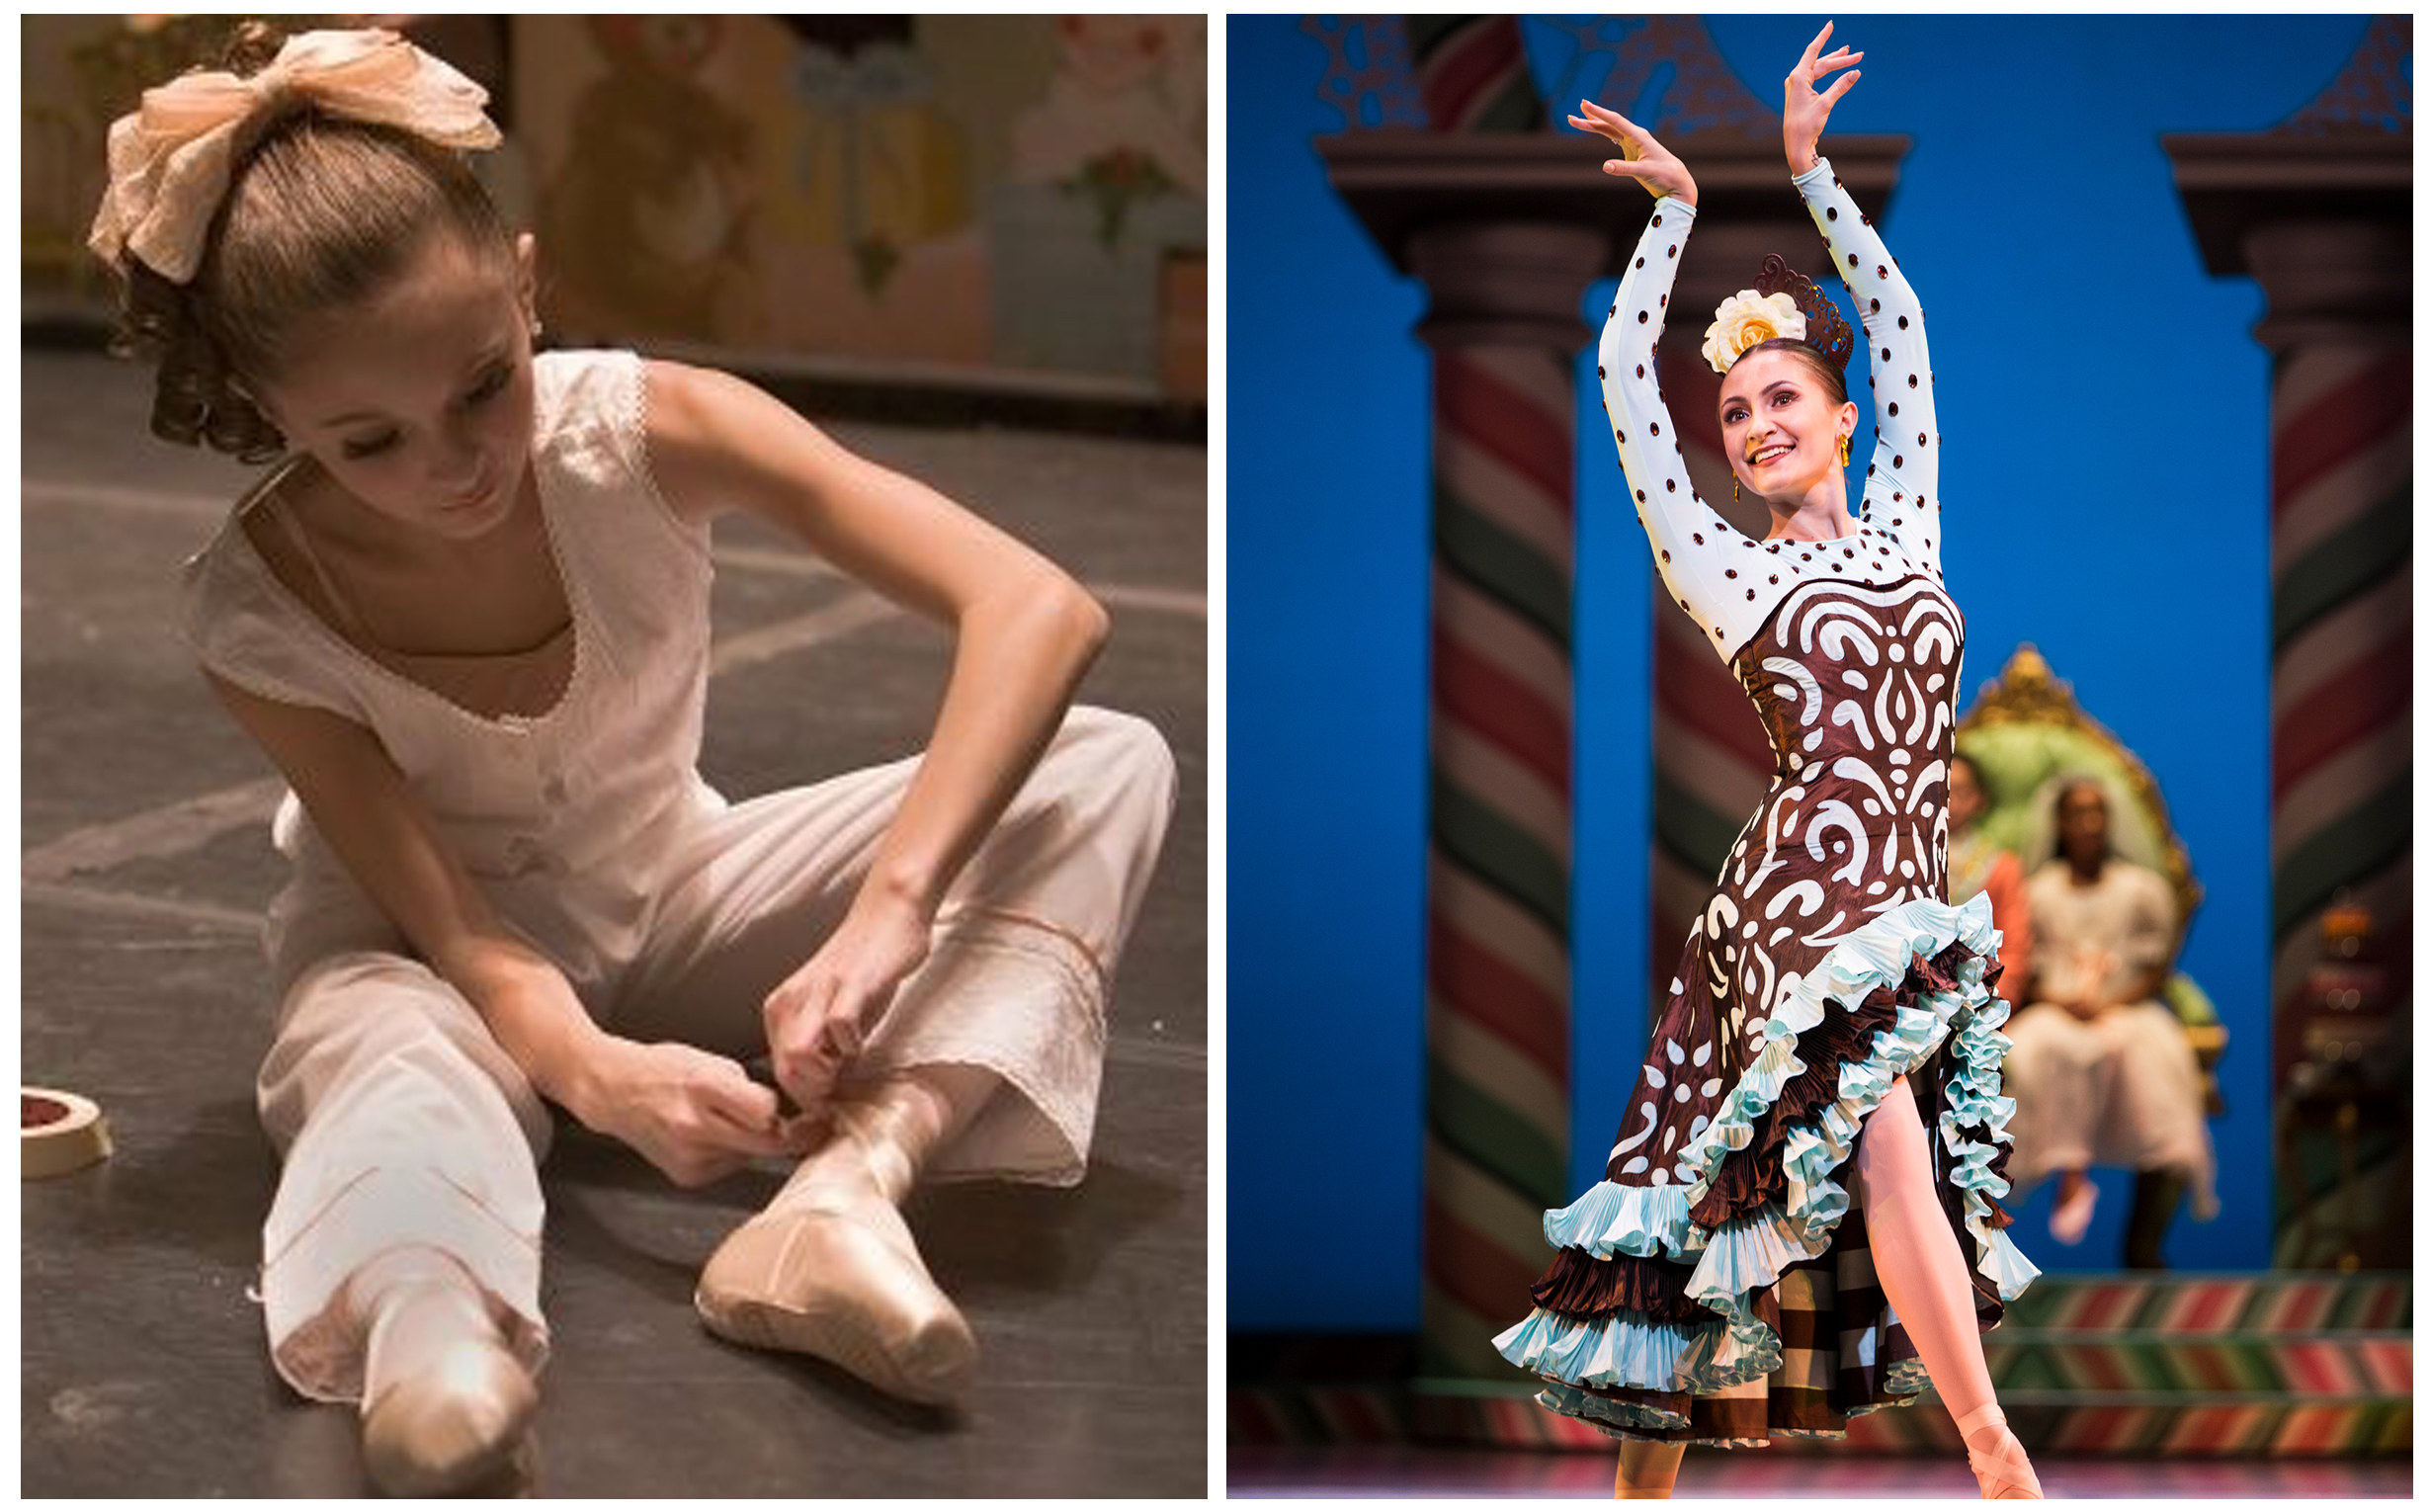 Nancy Casciano - Now and Then, Nutcracker Grows Up